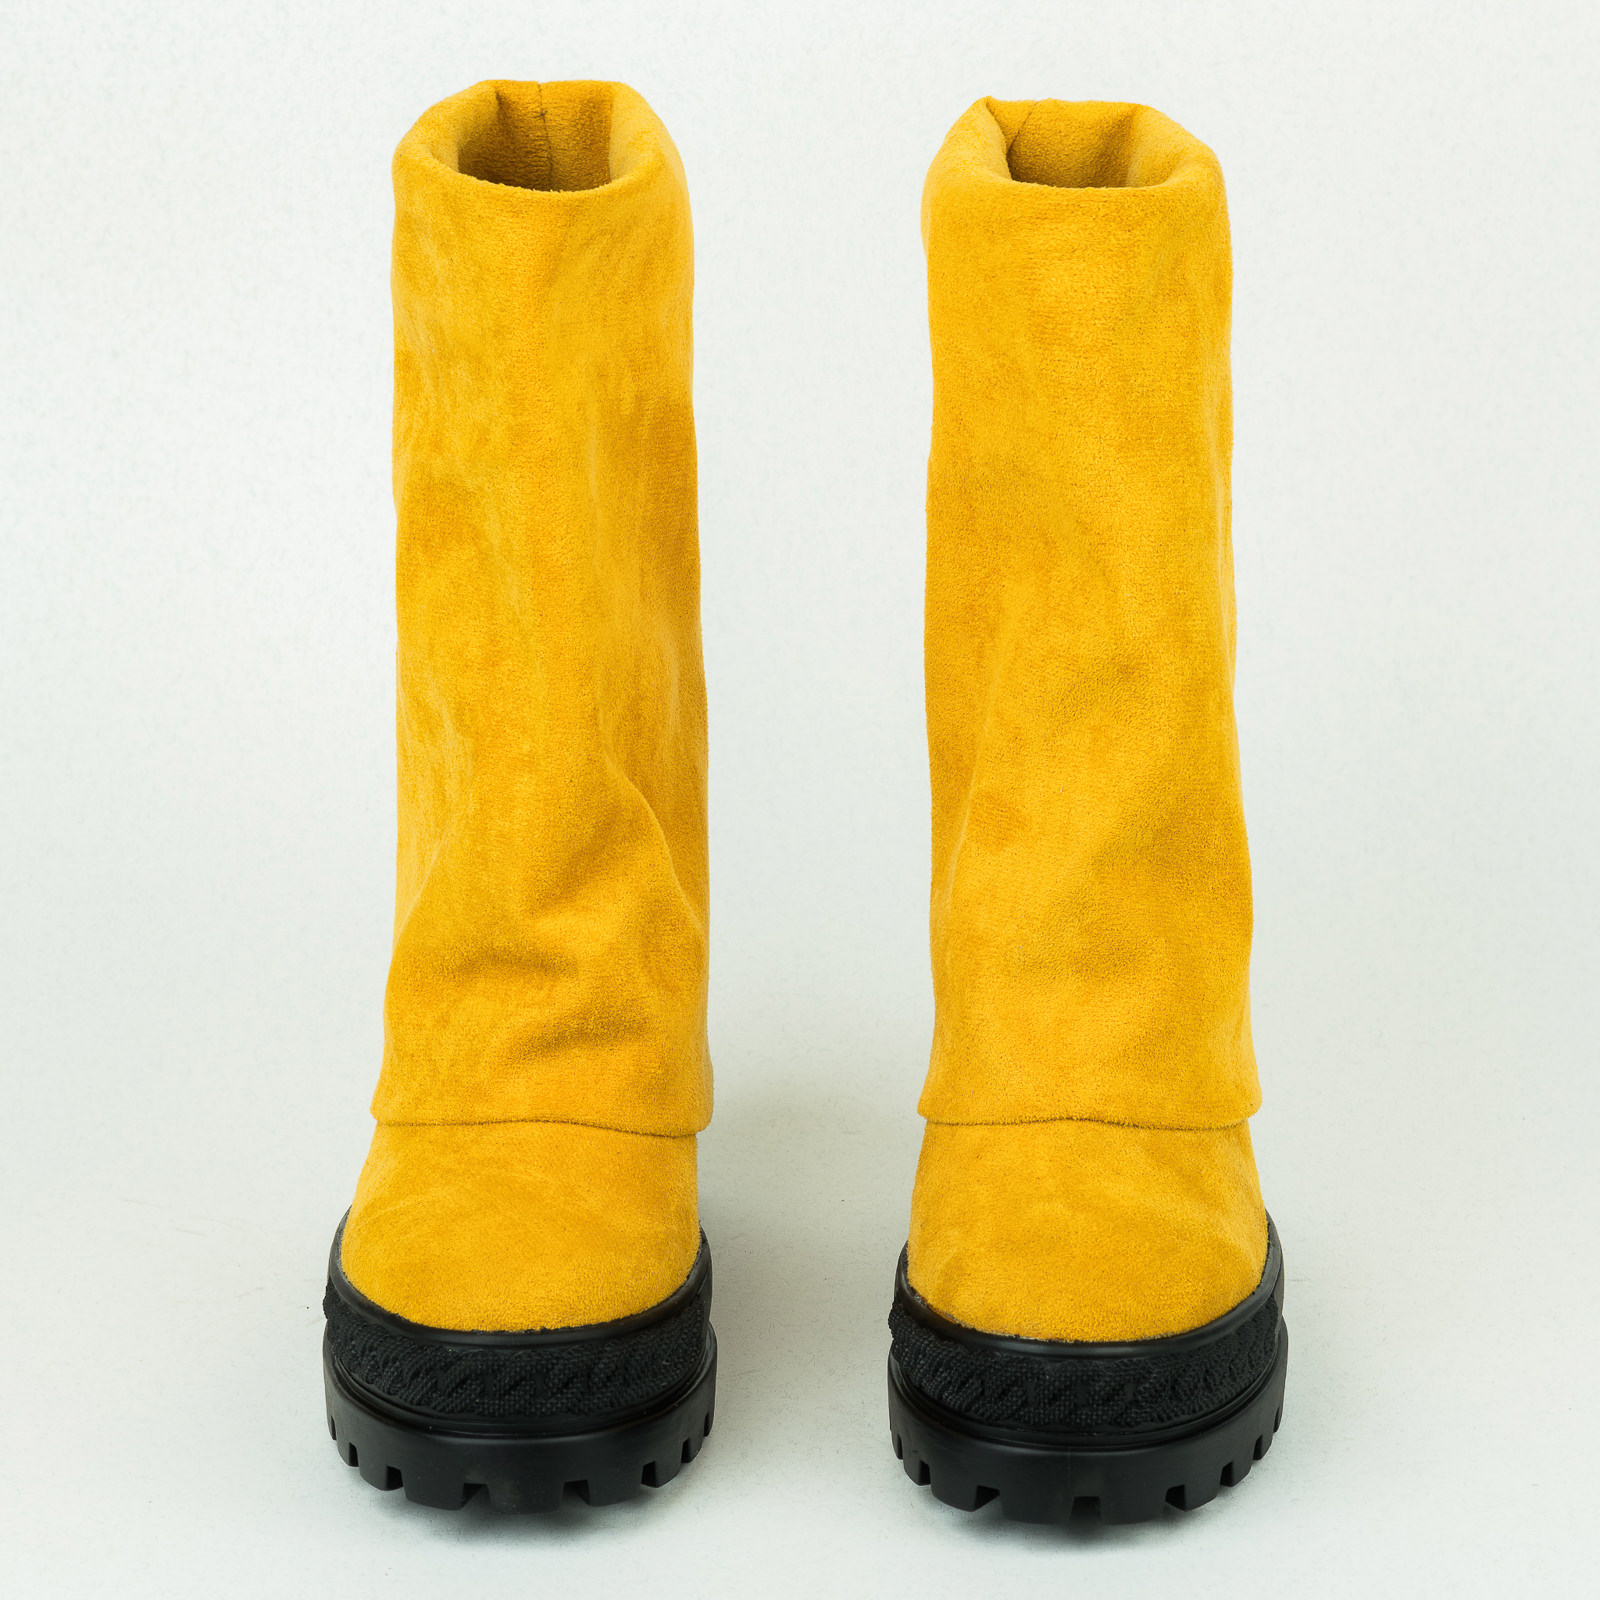 Women ankle boots B426 - YELLOW